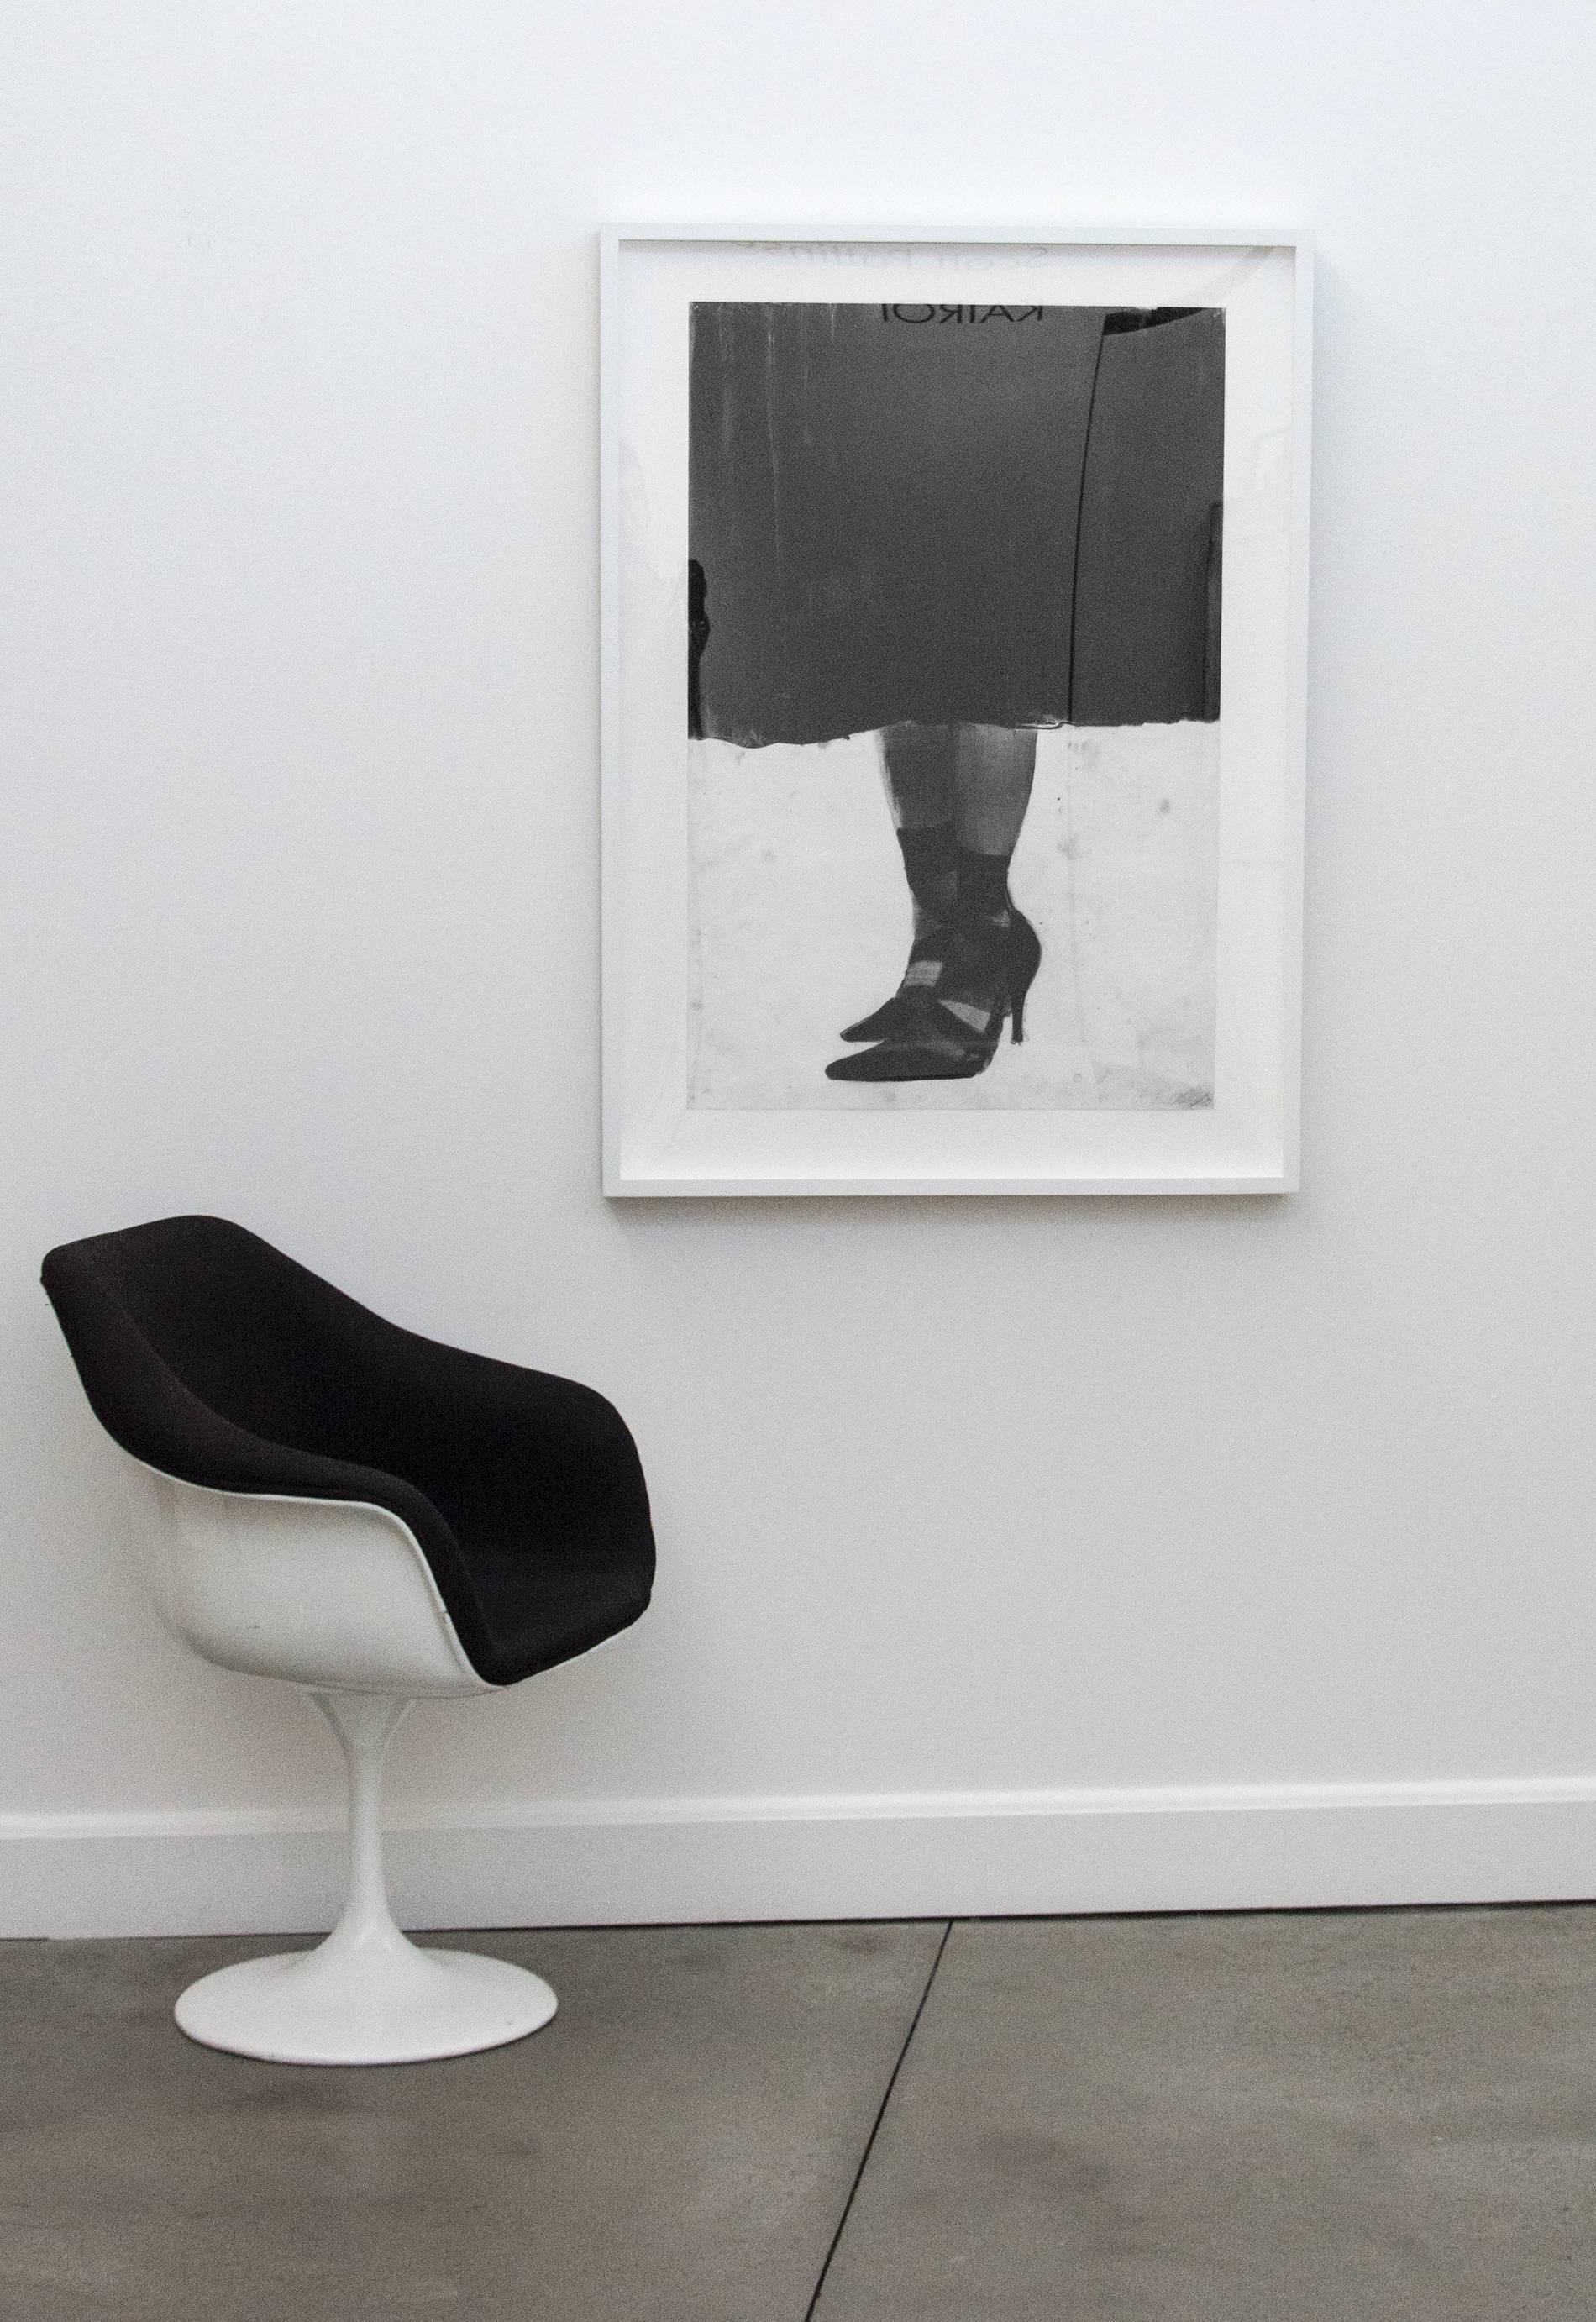 This work - a woman's legs and feet showing below the changing room curtain - continues Daley's exploration of ideas of fashion and form. The work is on vellum, and floats within the frame. 

“These drawings reflect a contemporary, post-feminist